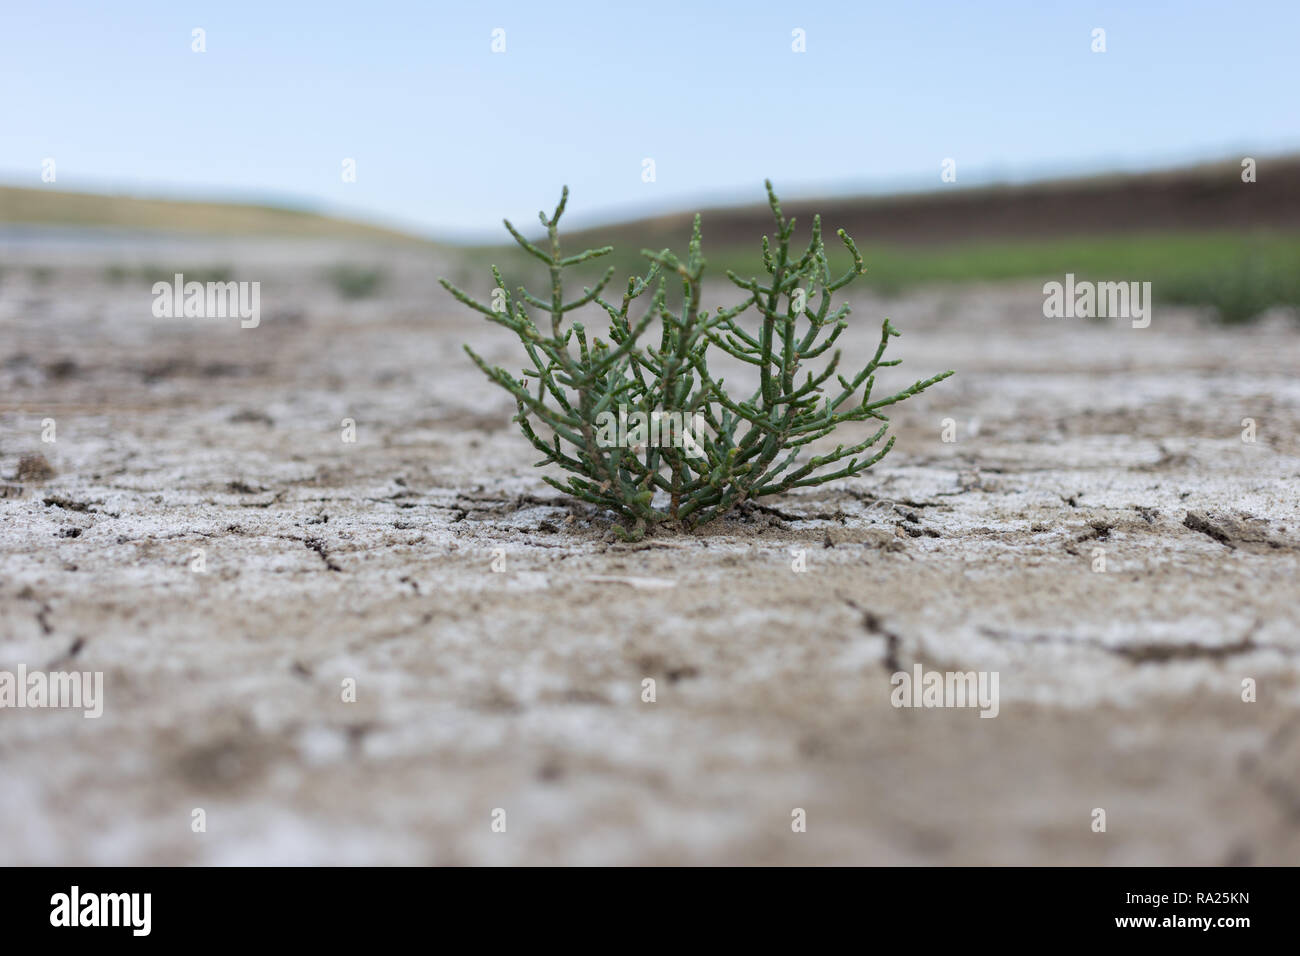 Salicornia plant that grows in salt marshes on beaches is tasty and healthy food. Stock Photo